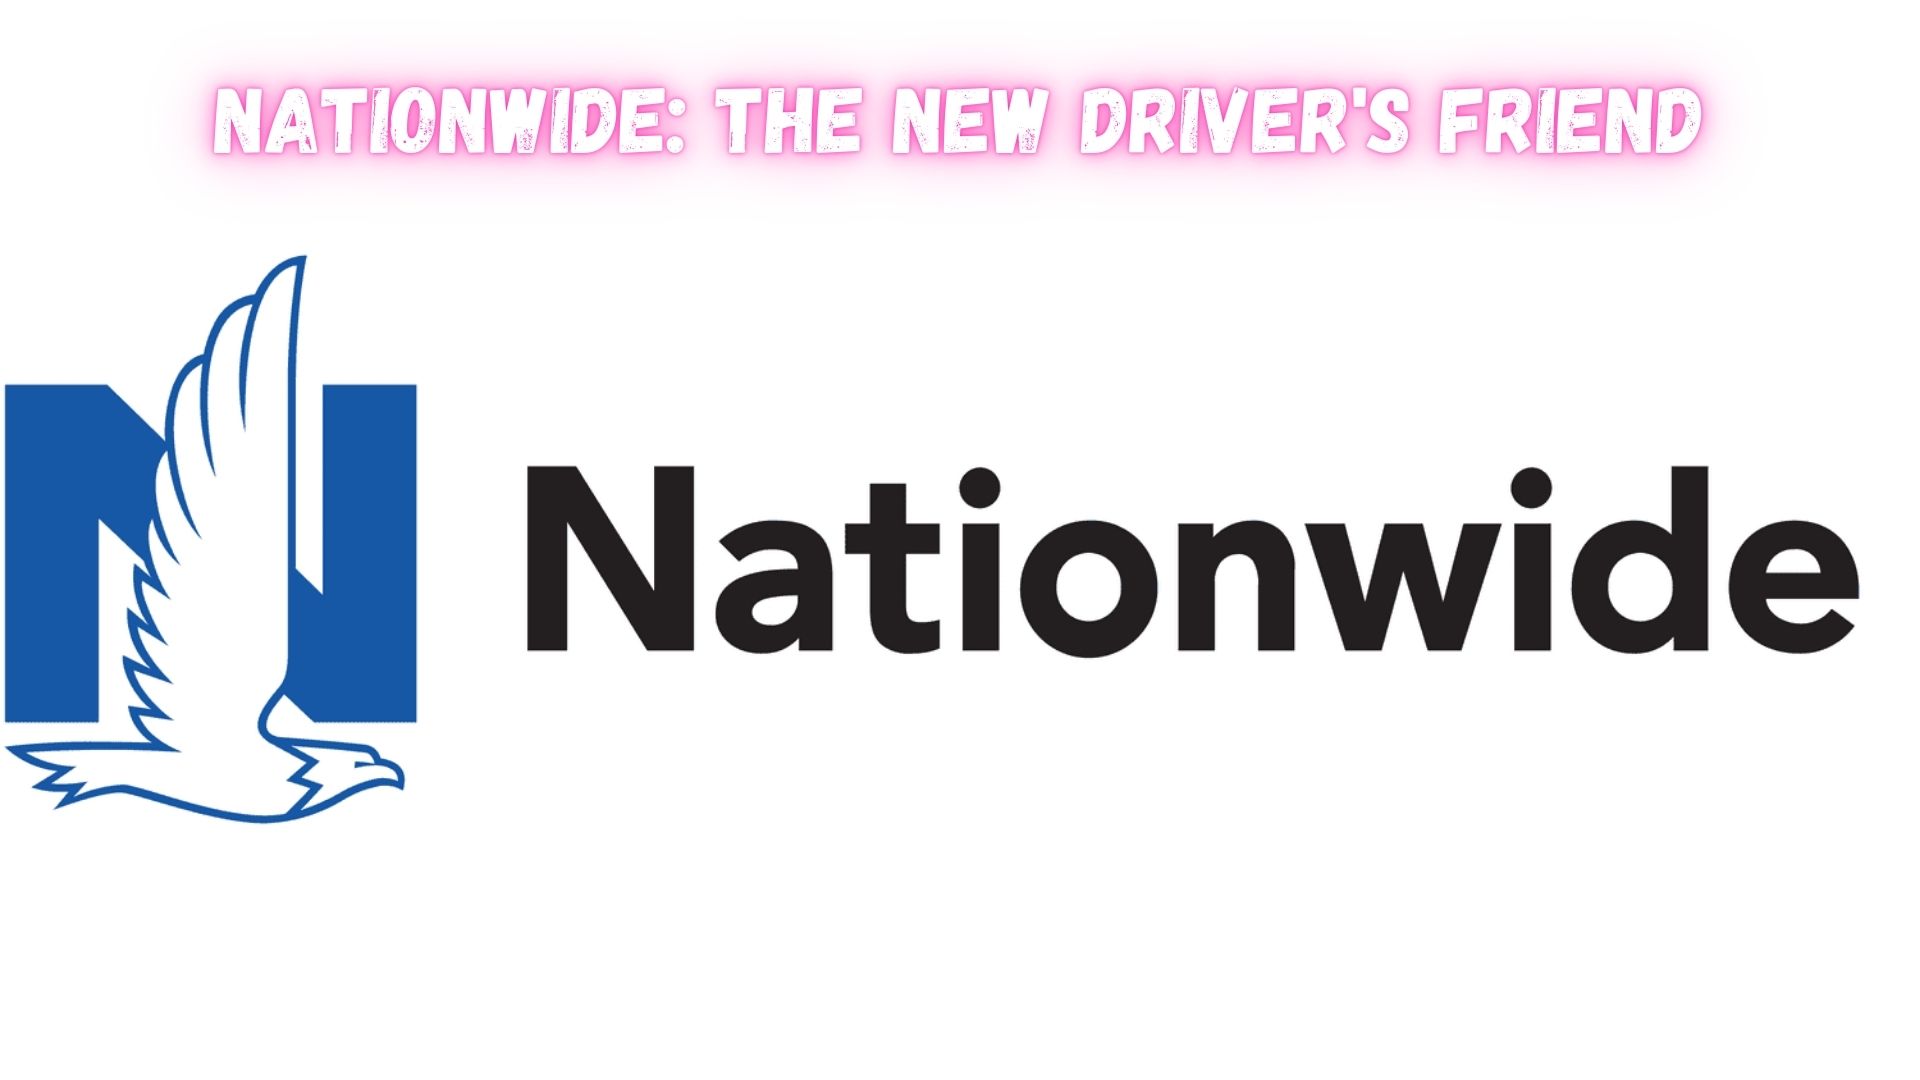 Nationwide The New Driver's Friend.